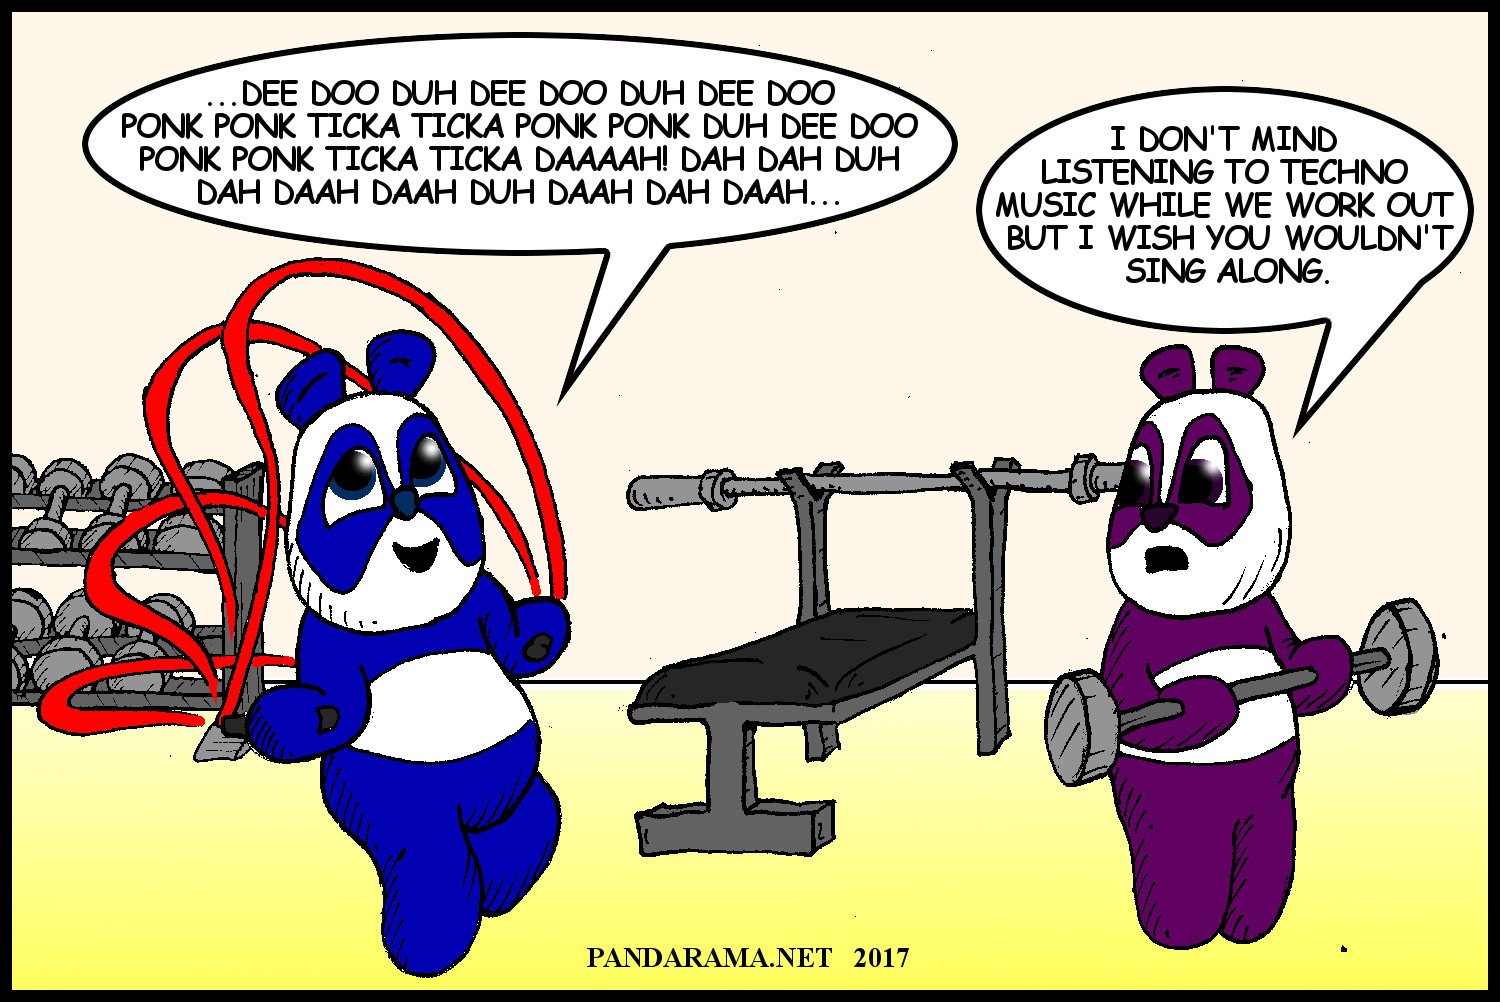 the panda is making nonsense noises because it is singing along with techno. jump rope cartoon. electronic dance music cartoon. phonetic translation.